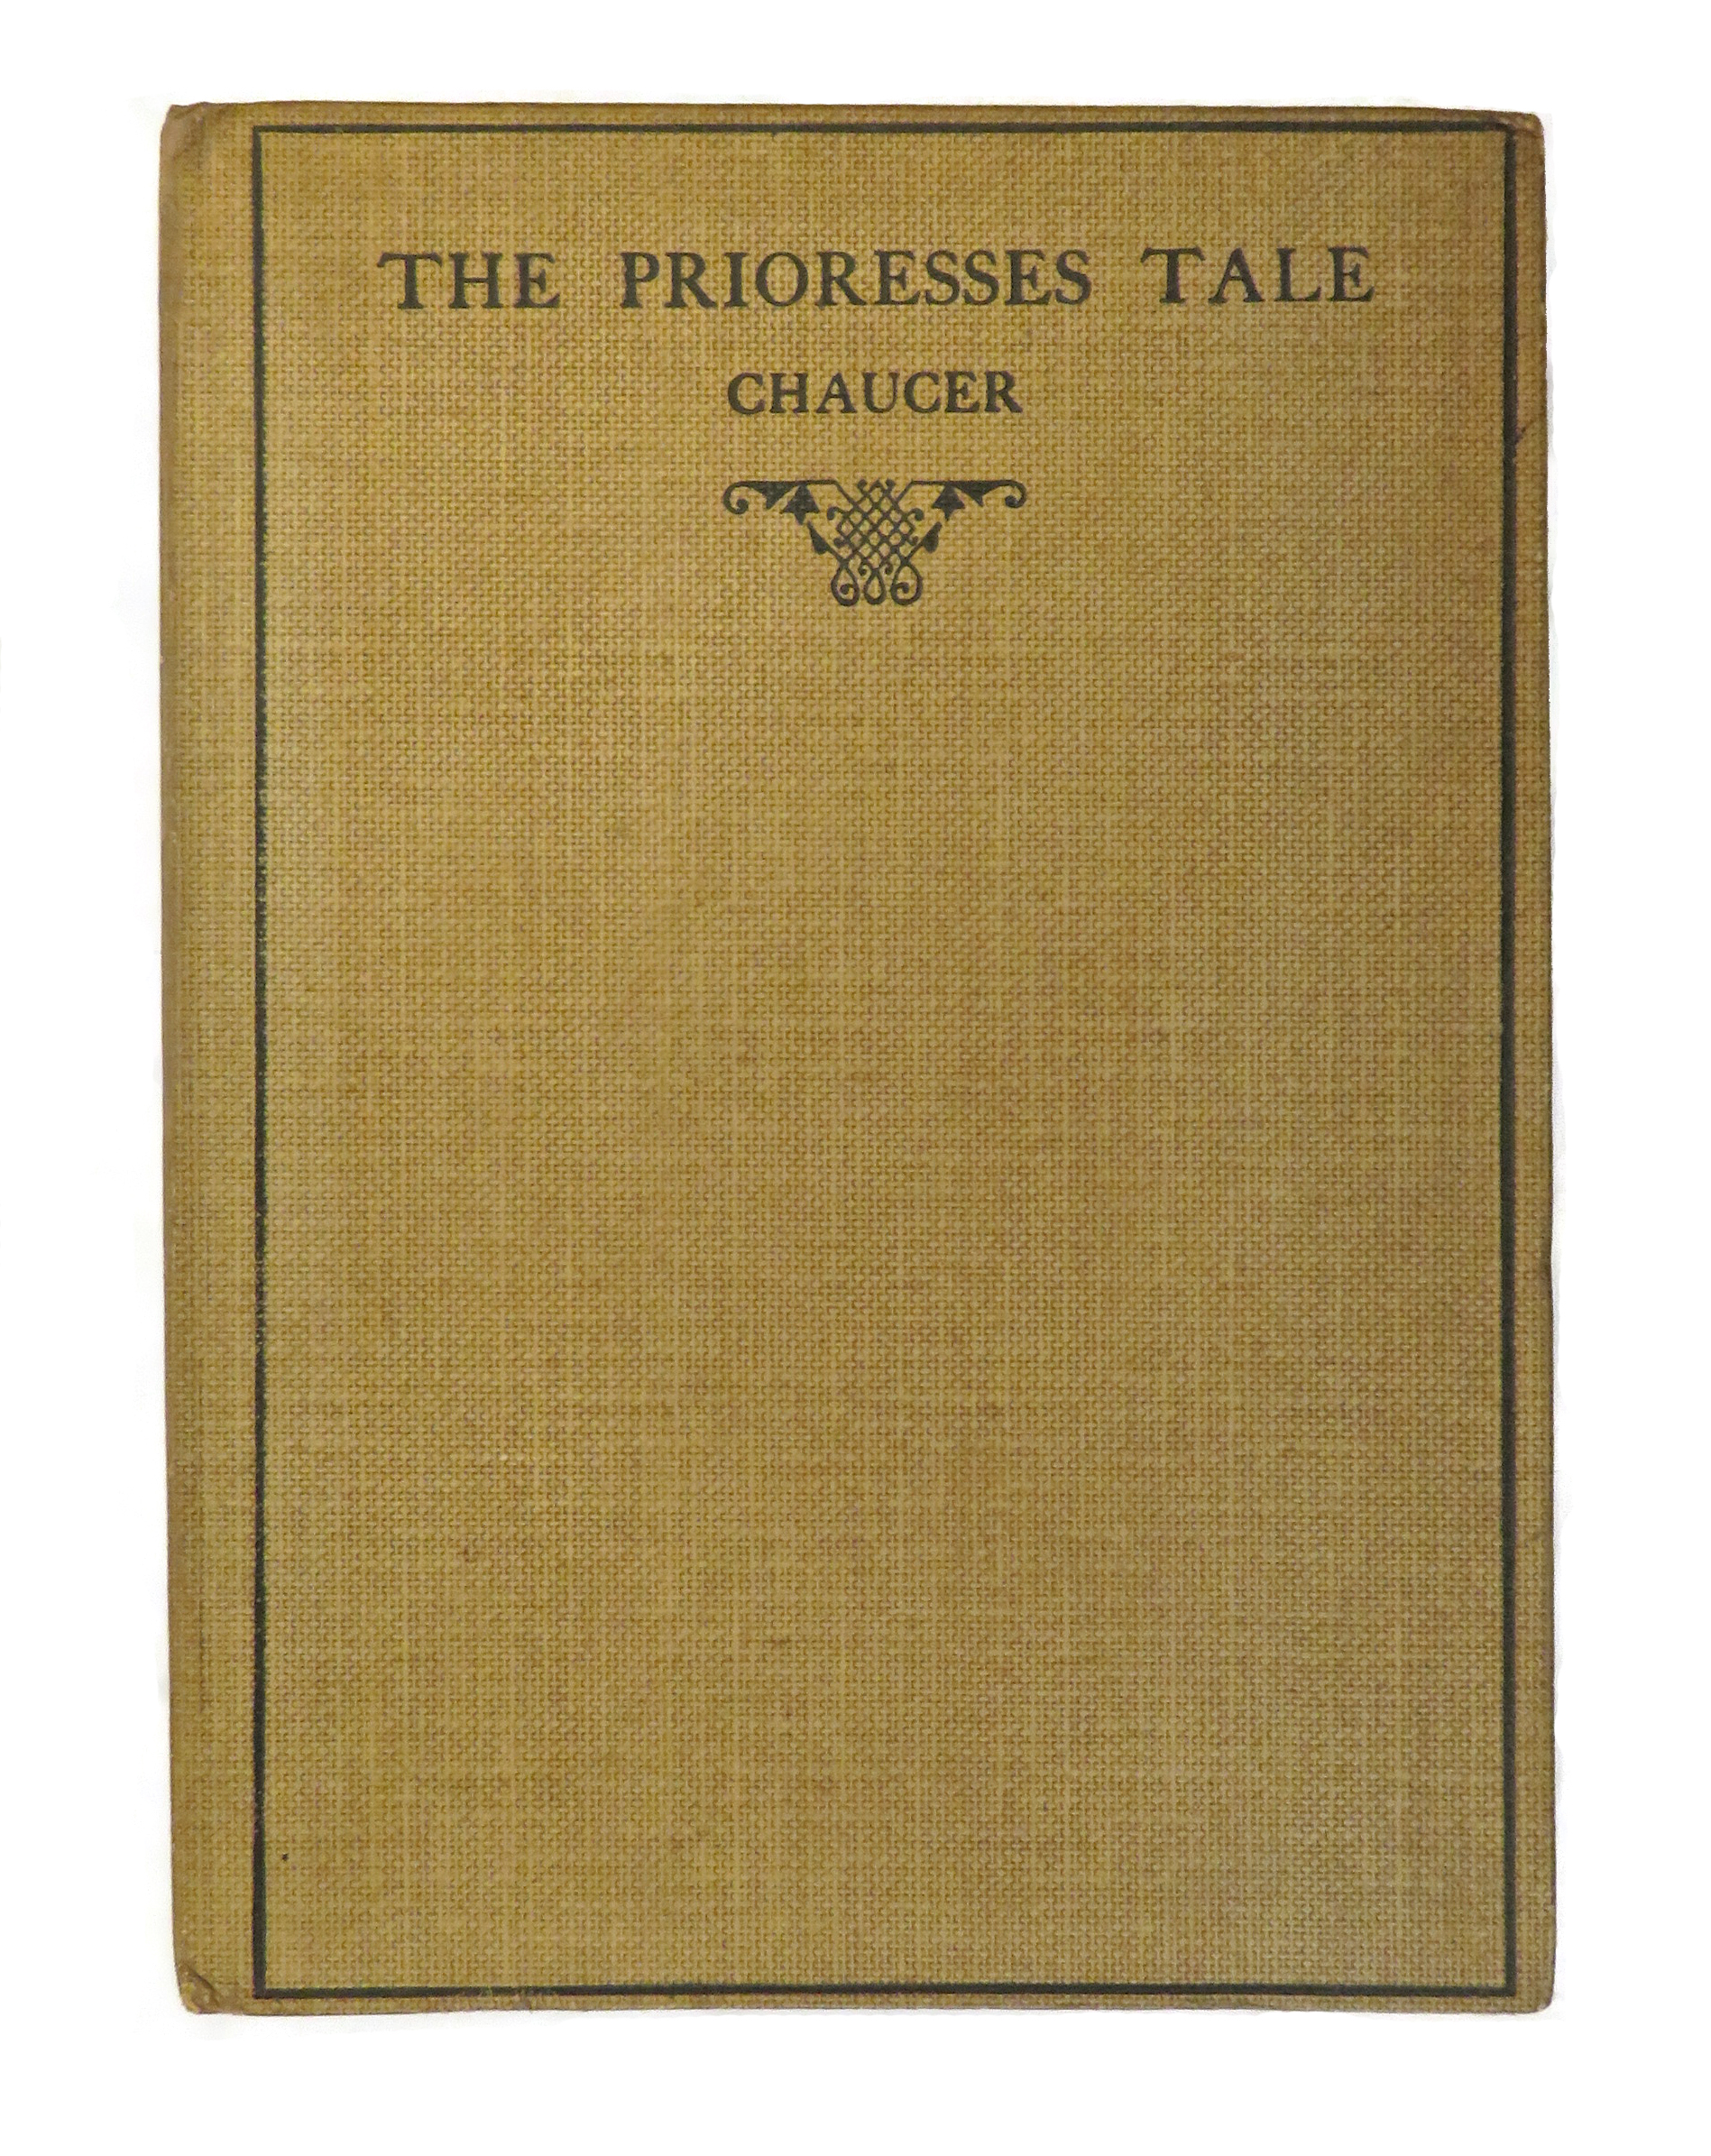 The Prioresses Tale. From the Canterbury Tales